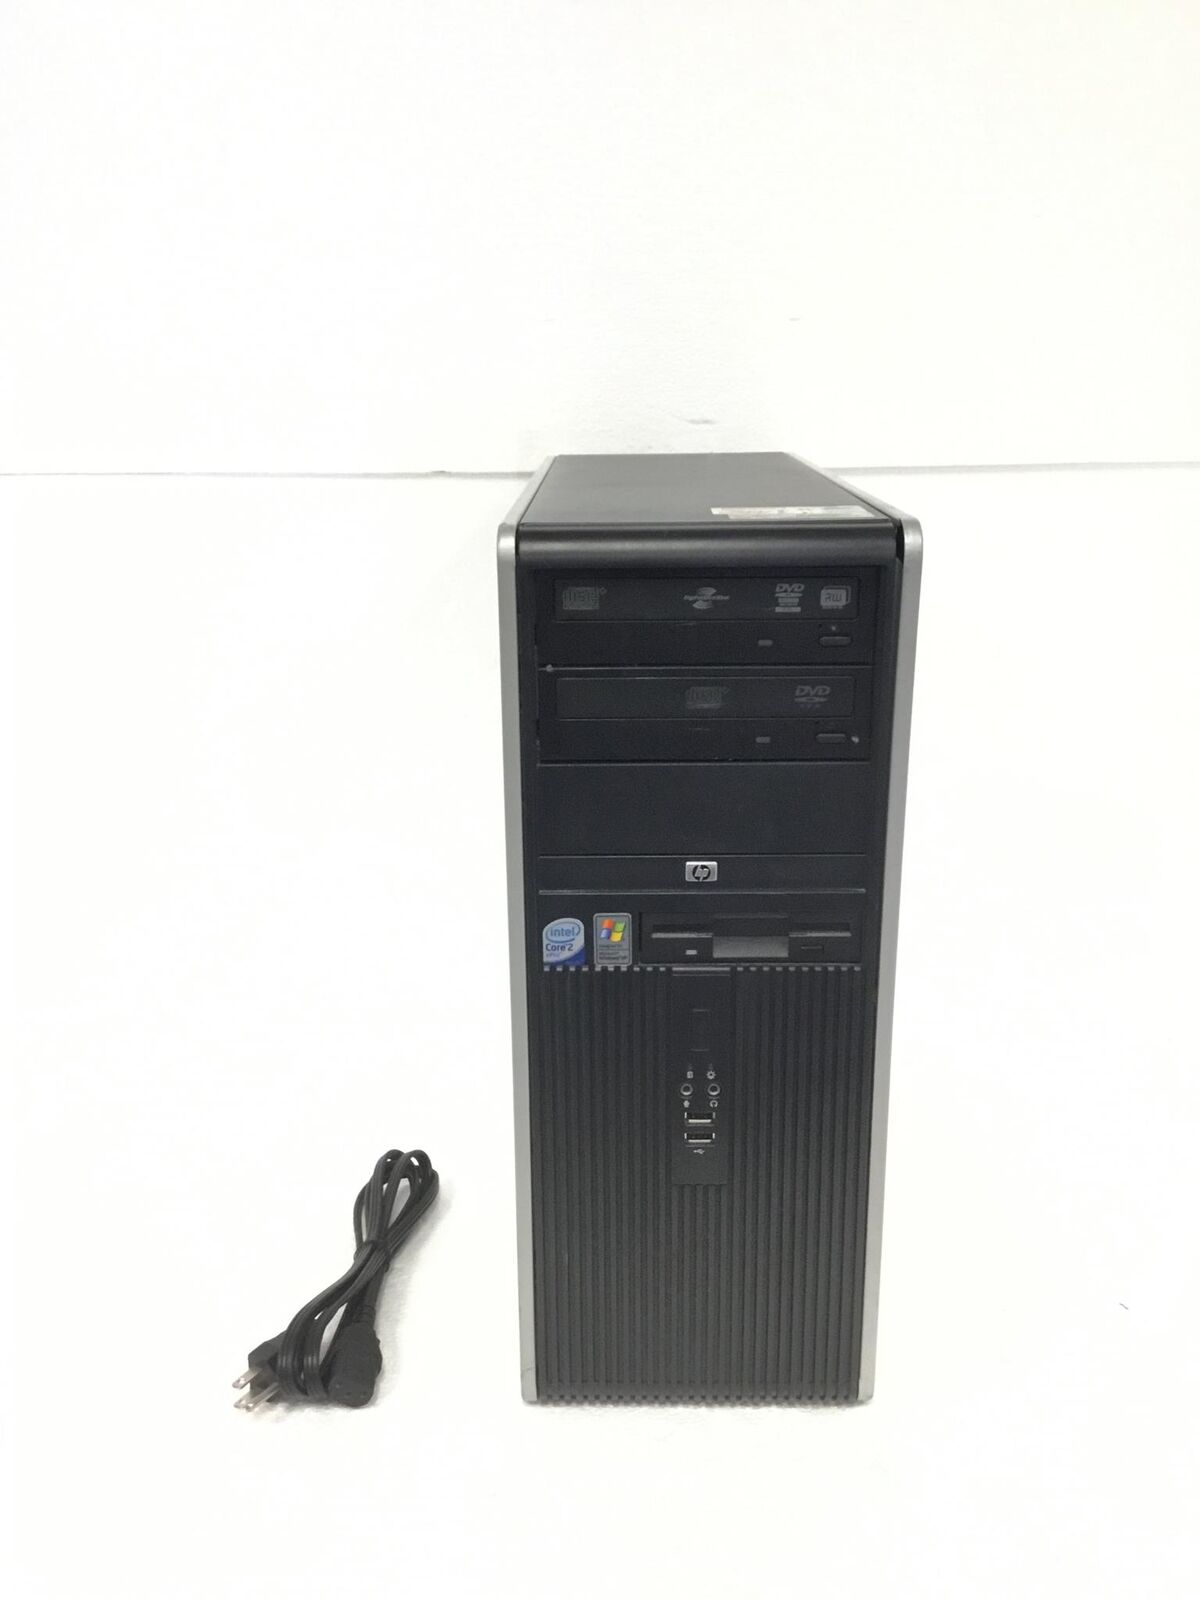 HP Compaq DC7800 Core 2 Duo E6550 2.33Ghz CMT Computer 4GB,DVD  WORKS Parallel